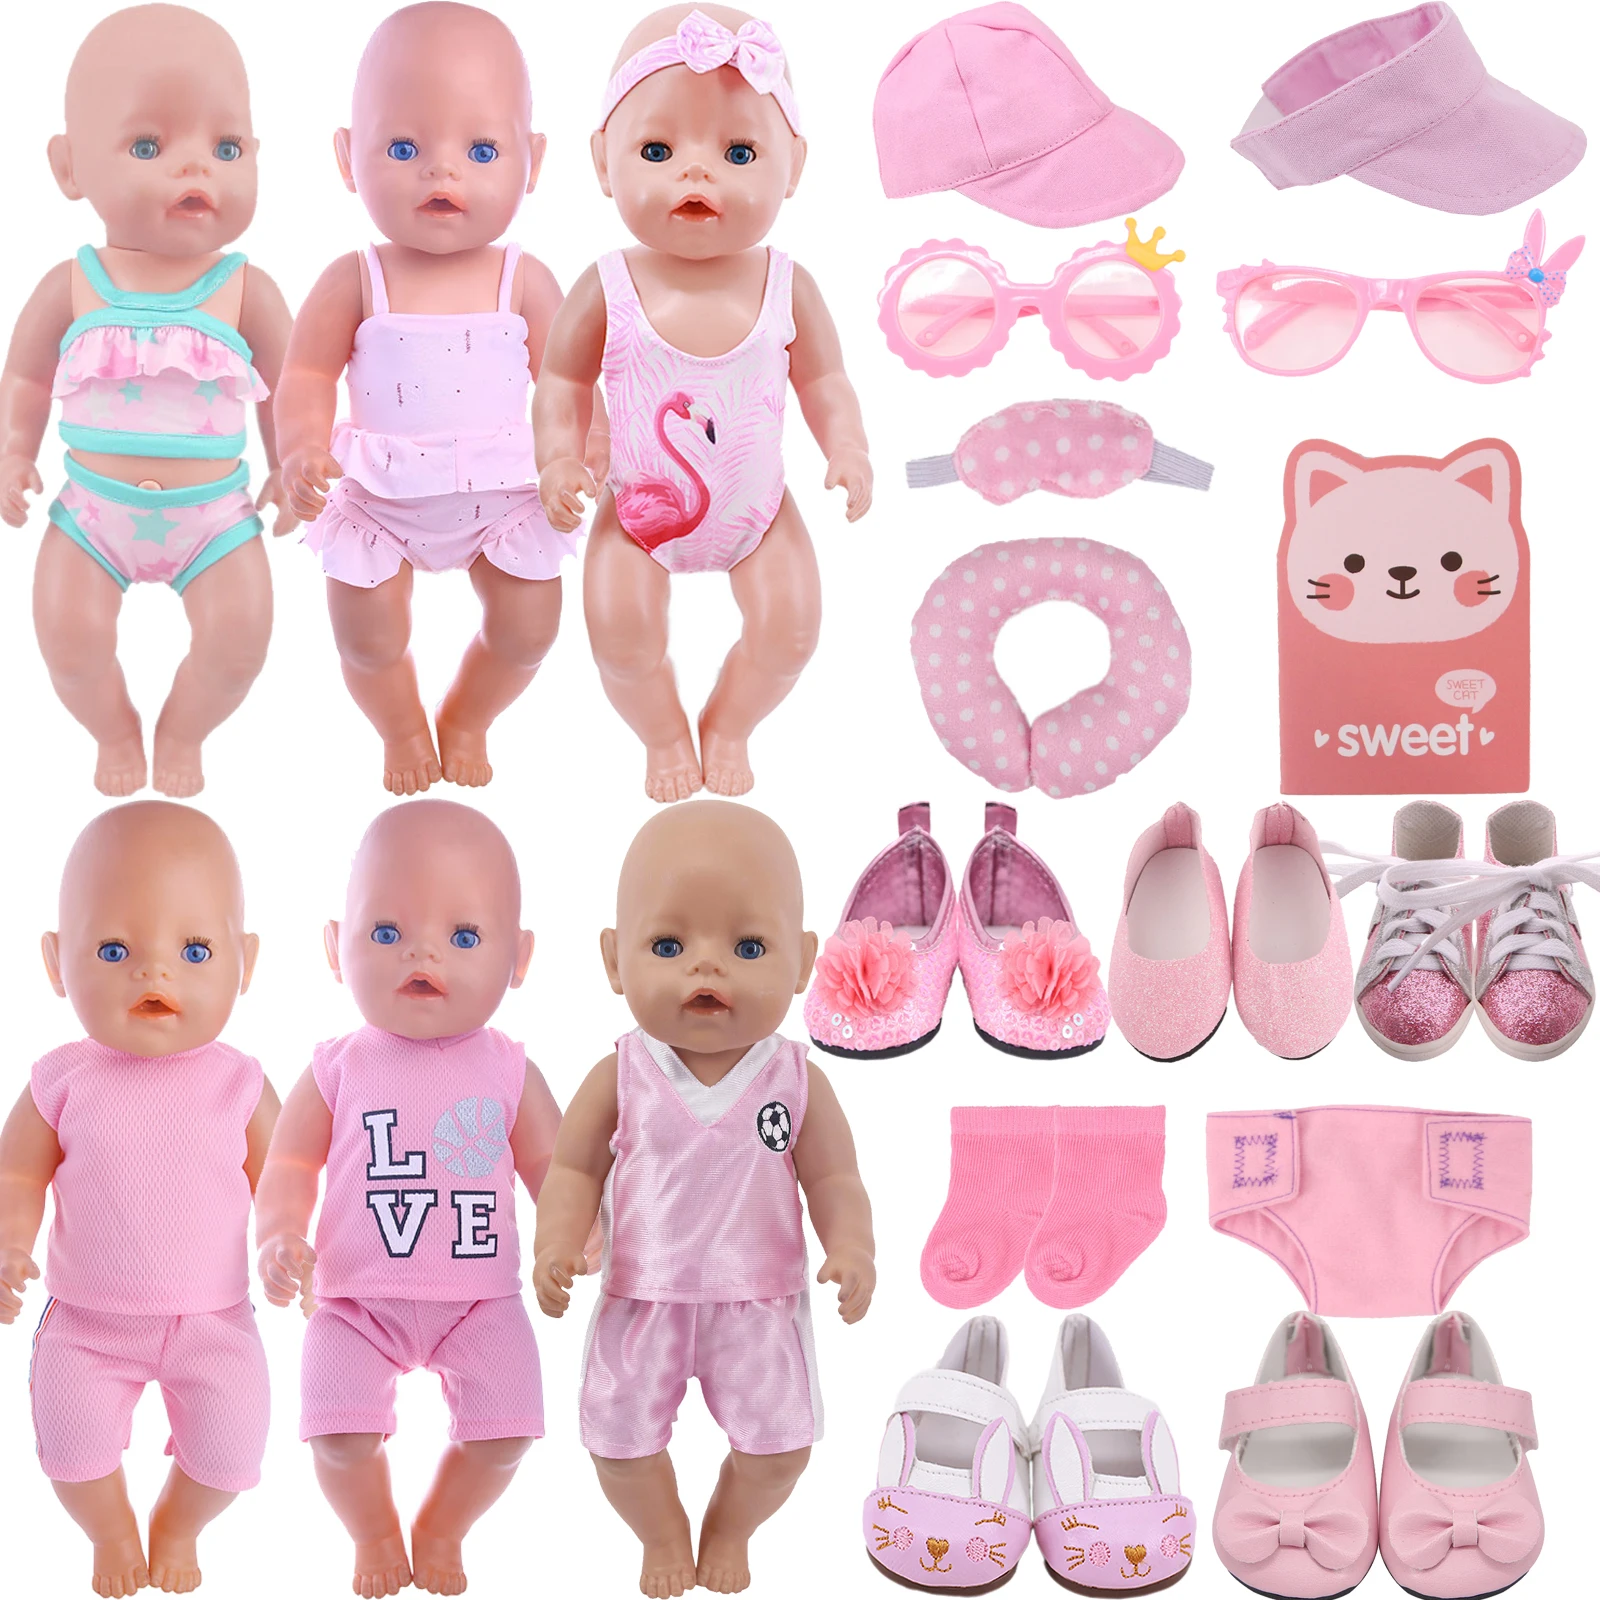 Doll Clothes Pink Swimsuit,Sports Wear,PU Shoes For 18Inch Girl Of American&43 Cm Reborn Baby Doll Accessories,Generation Gifts